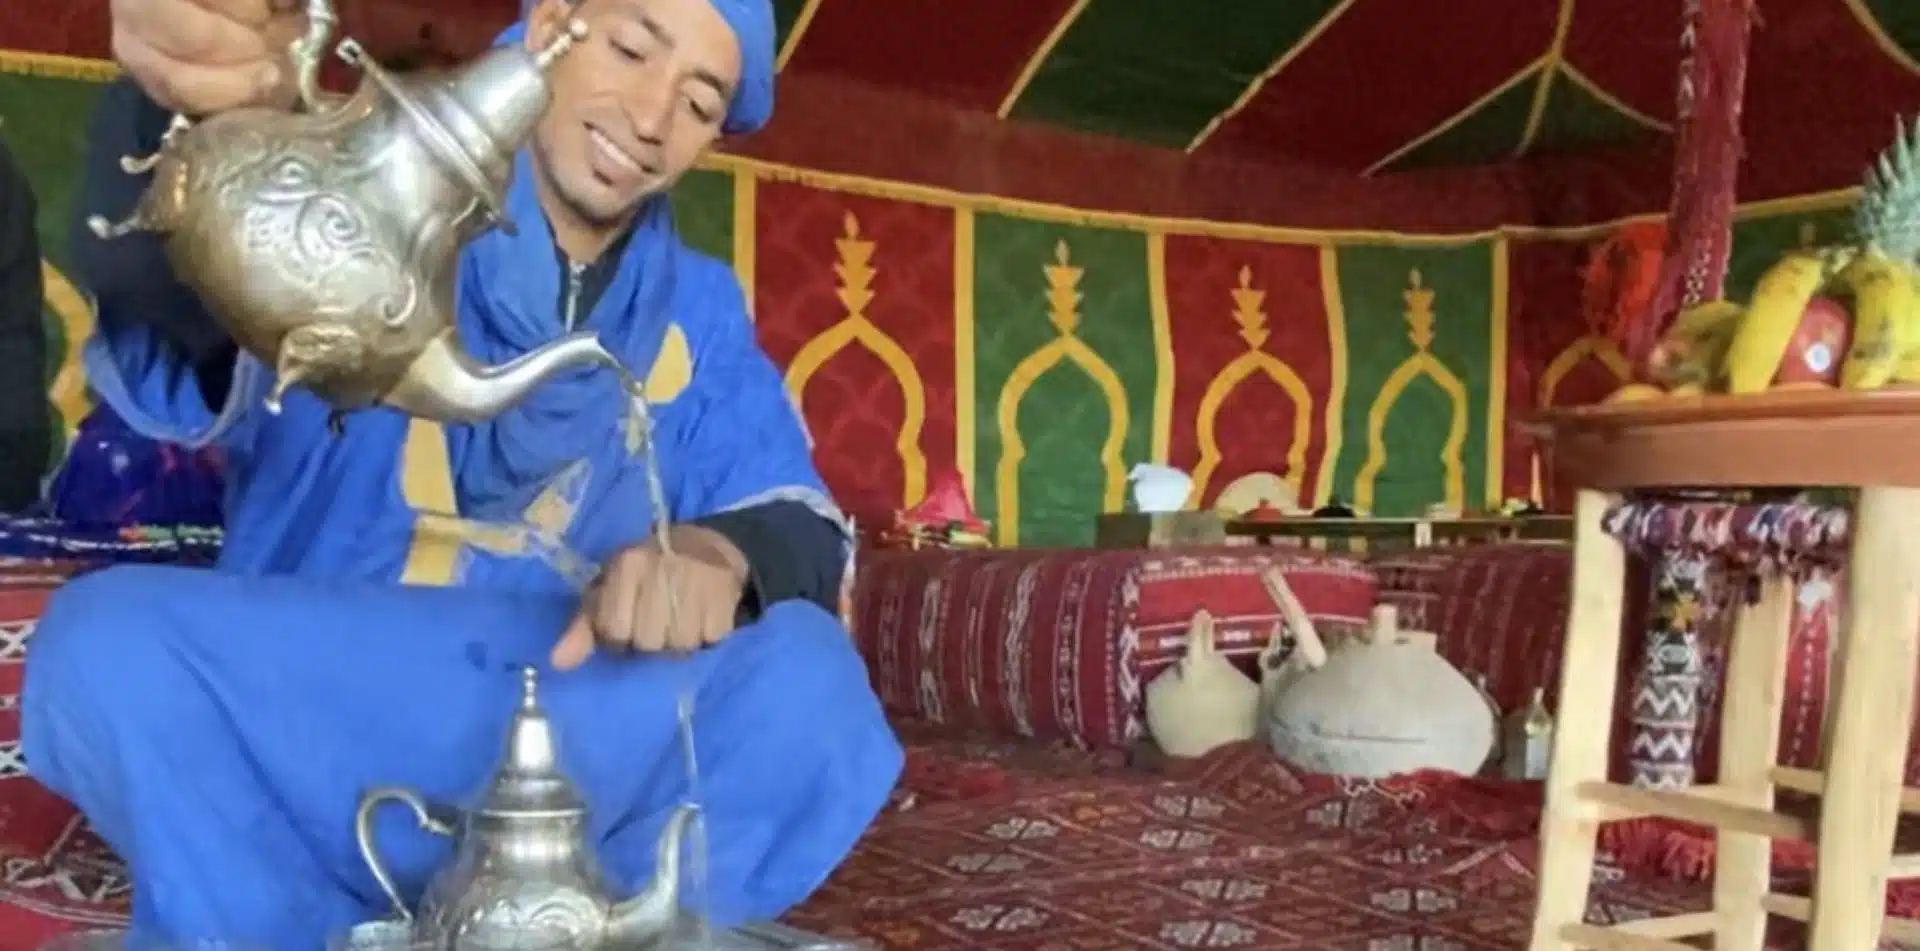 Classic Journeys' expert local guide pouring tea in Morocco